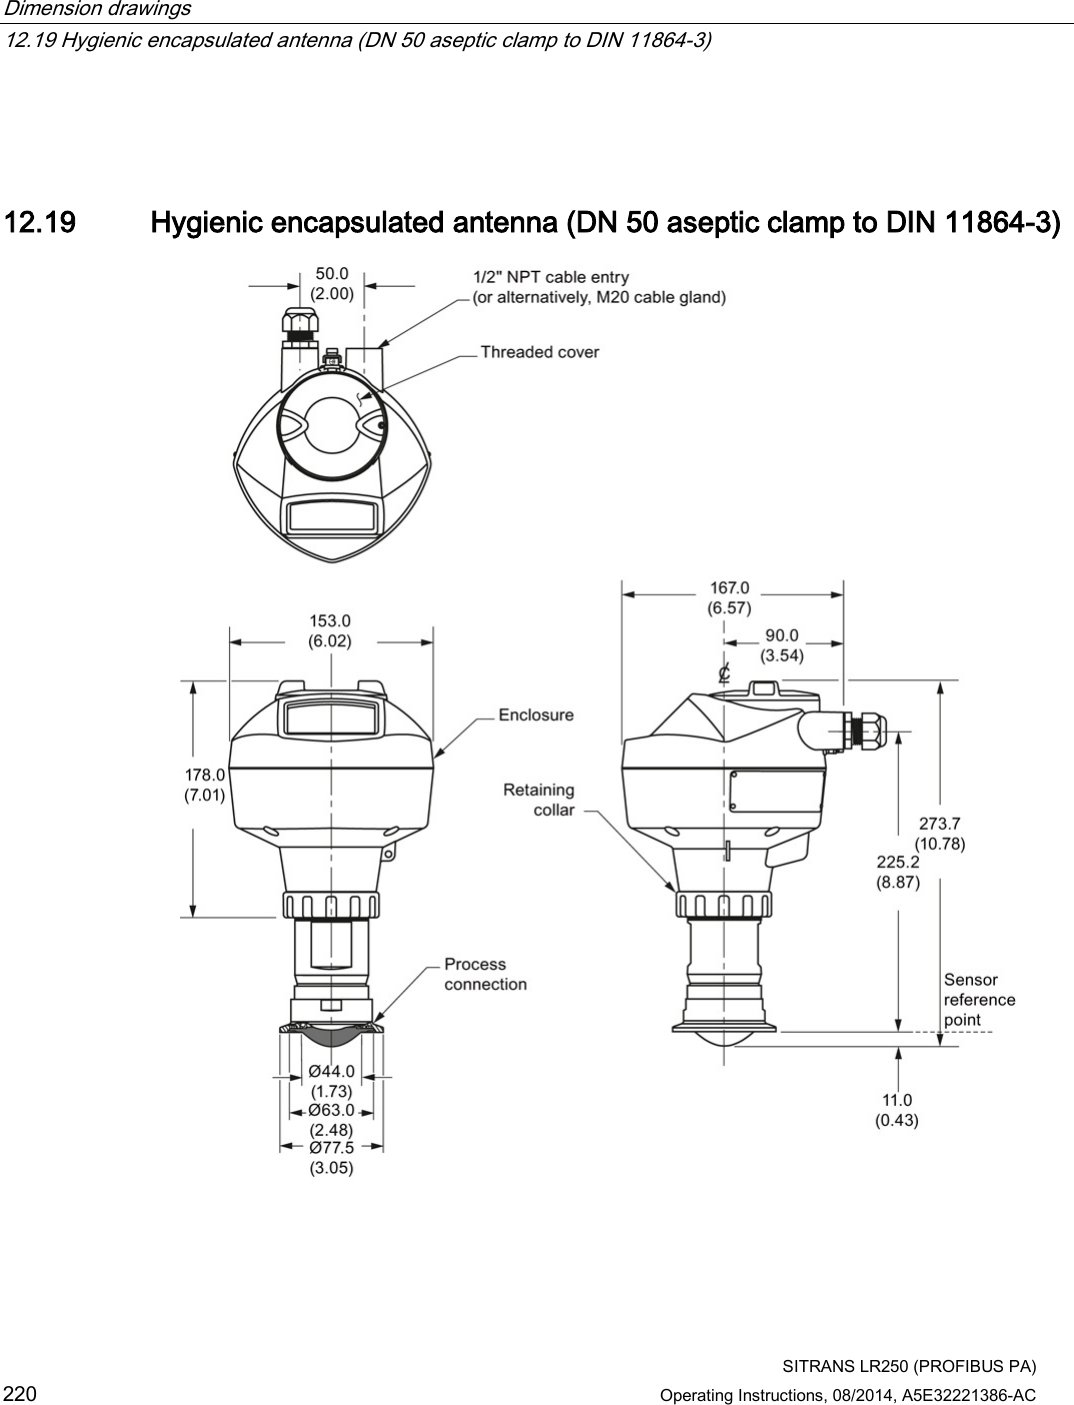 Dimension drawings   12.19 Hygienic encapsulated antenna (DN 50 aseptic clamp to DIN 11864-3)  SITRANS LR250 (PROFIBUS PA) 220 Operating Instructions, 08/2014, A5E32221386-AC  12.19 Hygienic encapsulated antenna (DN 50 aseptic clamp to DIN 11864-3)  